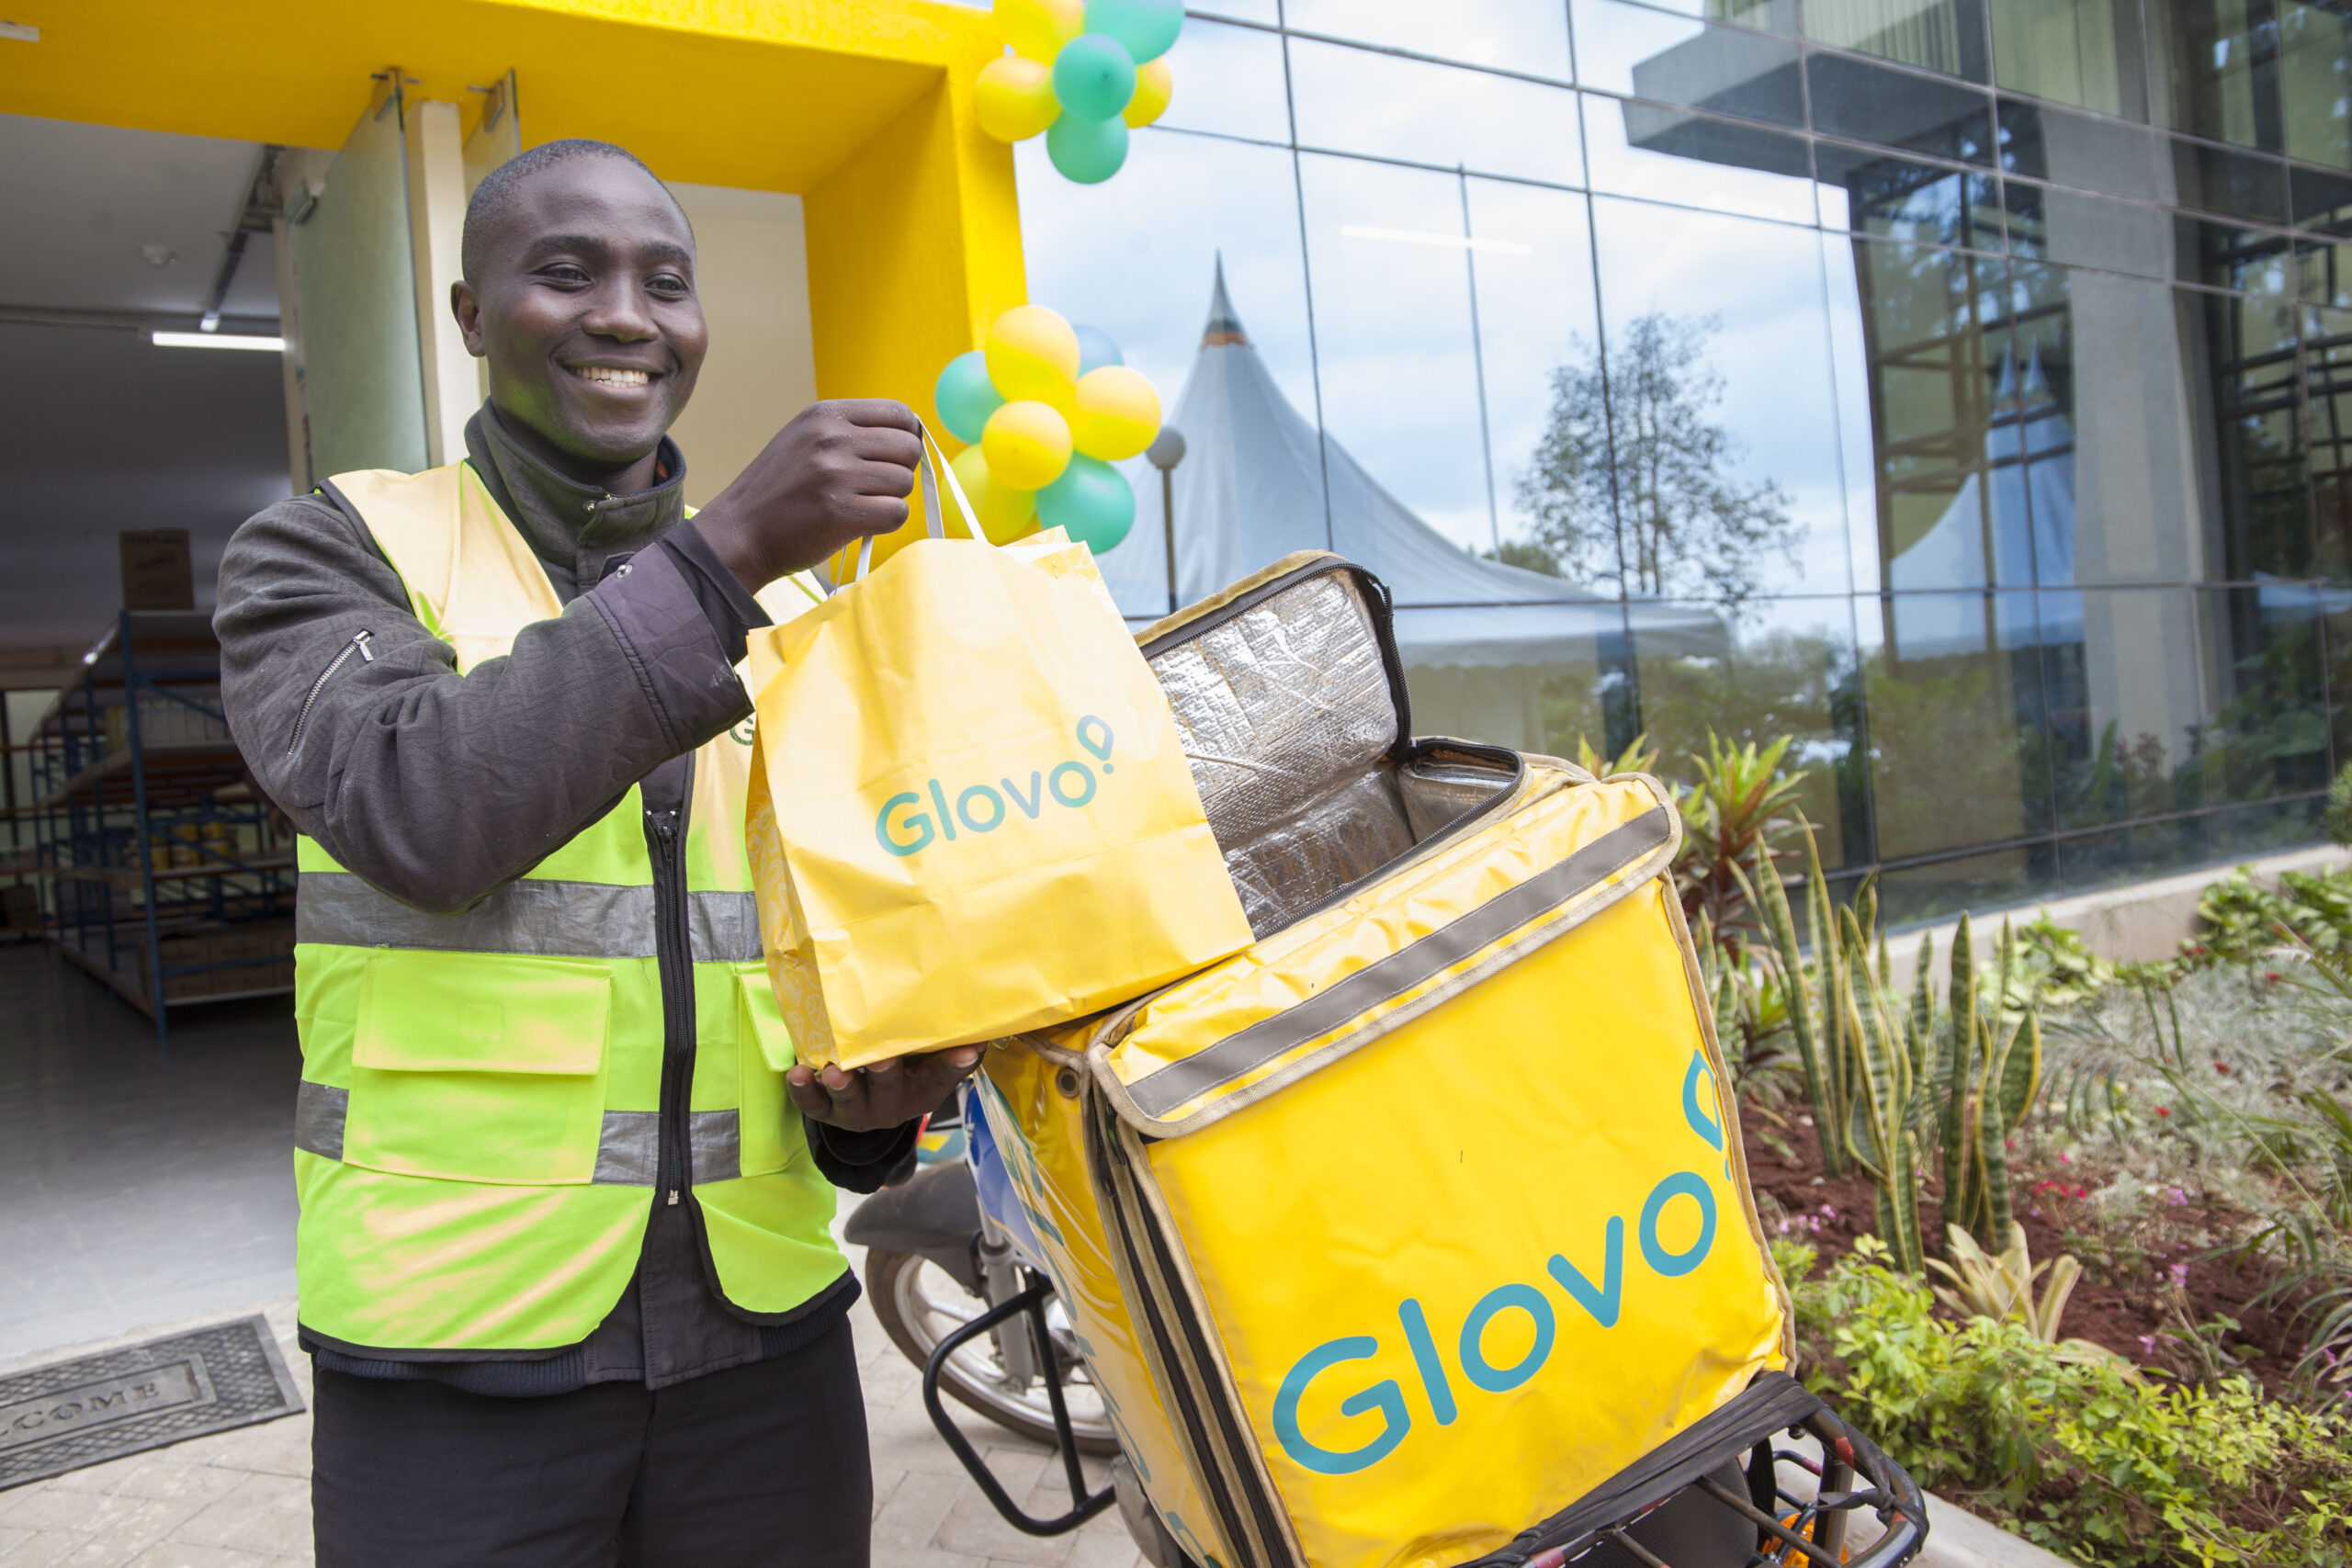 Courier Outside Glovo's MFC